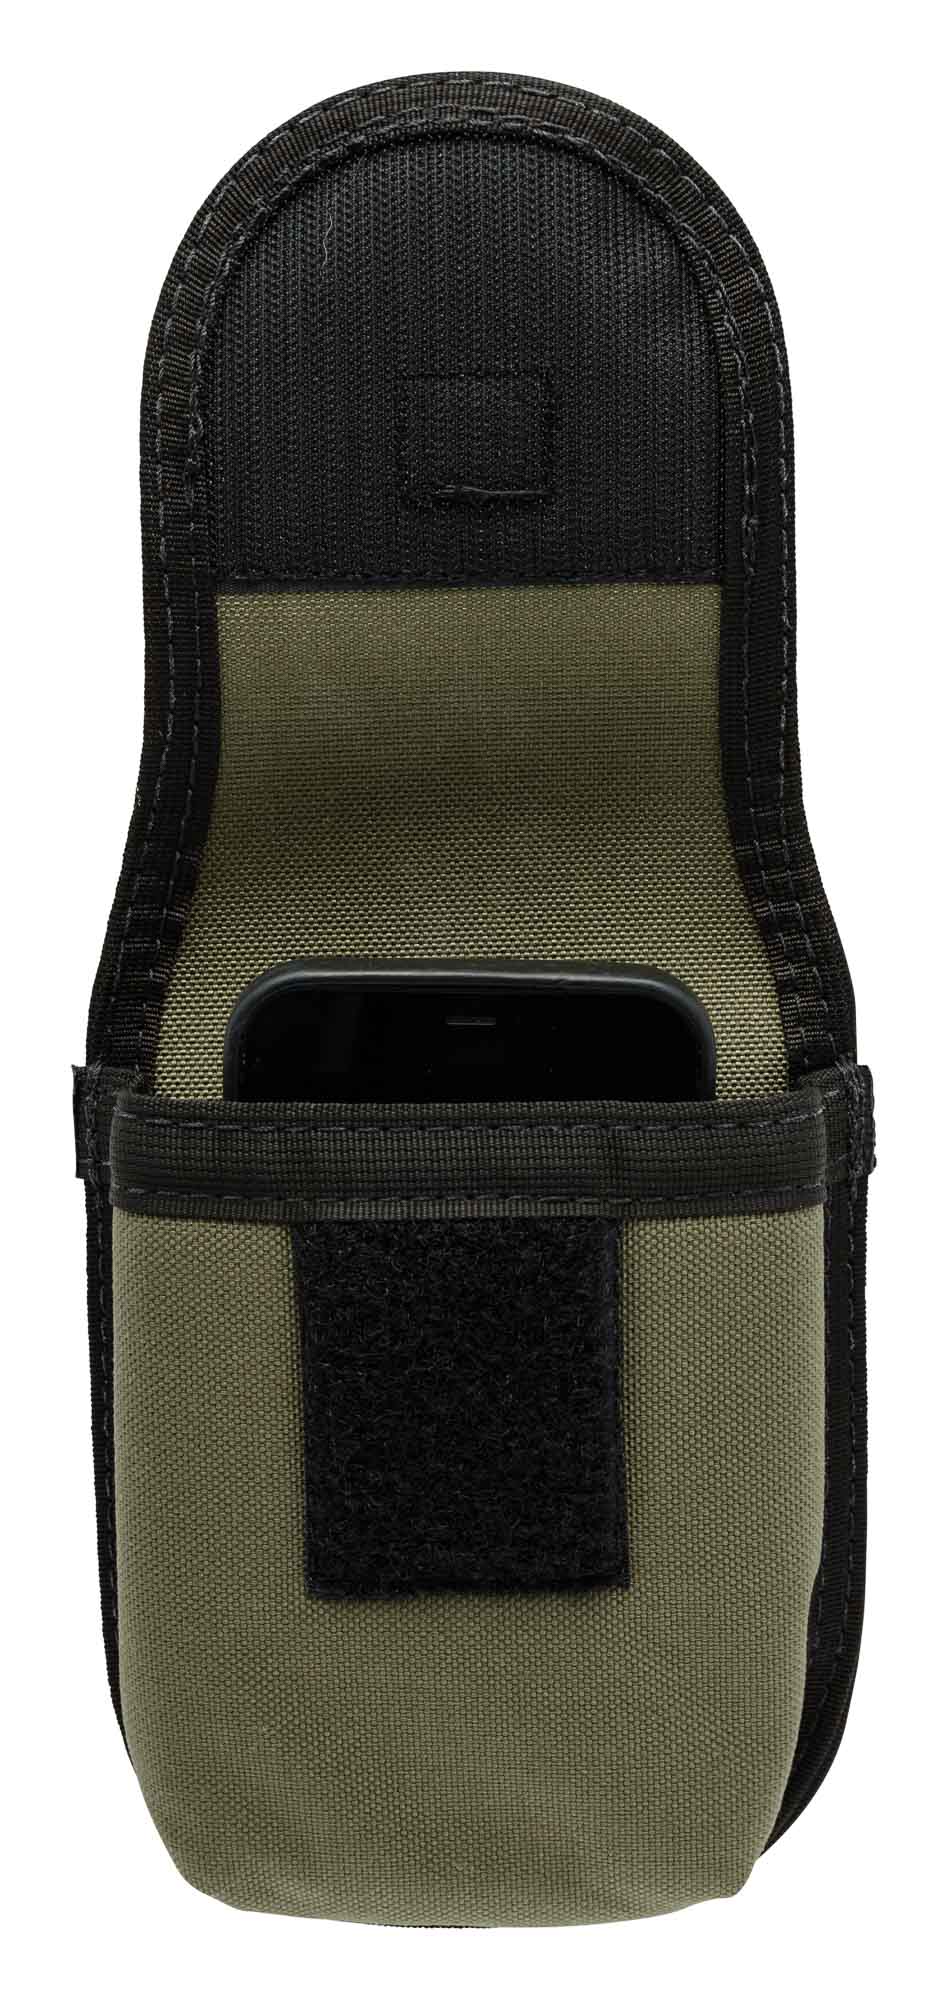 Phone Pouch 2.0